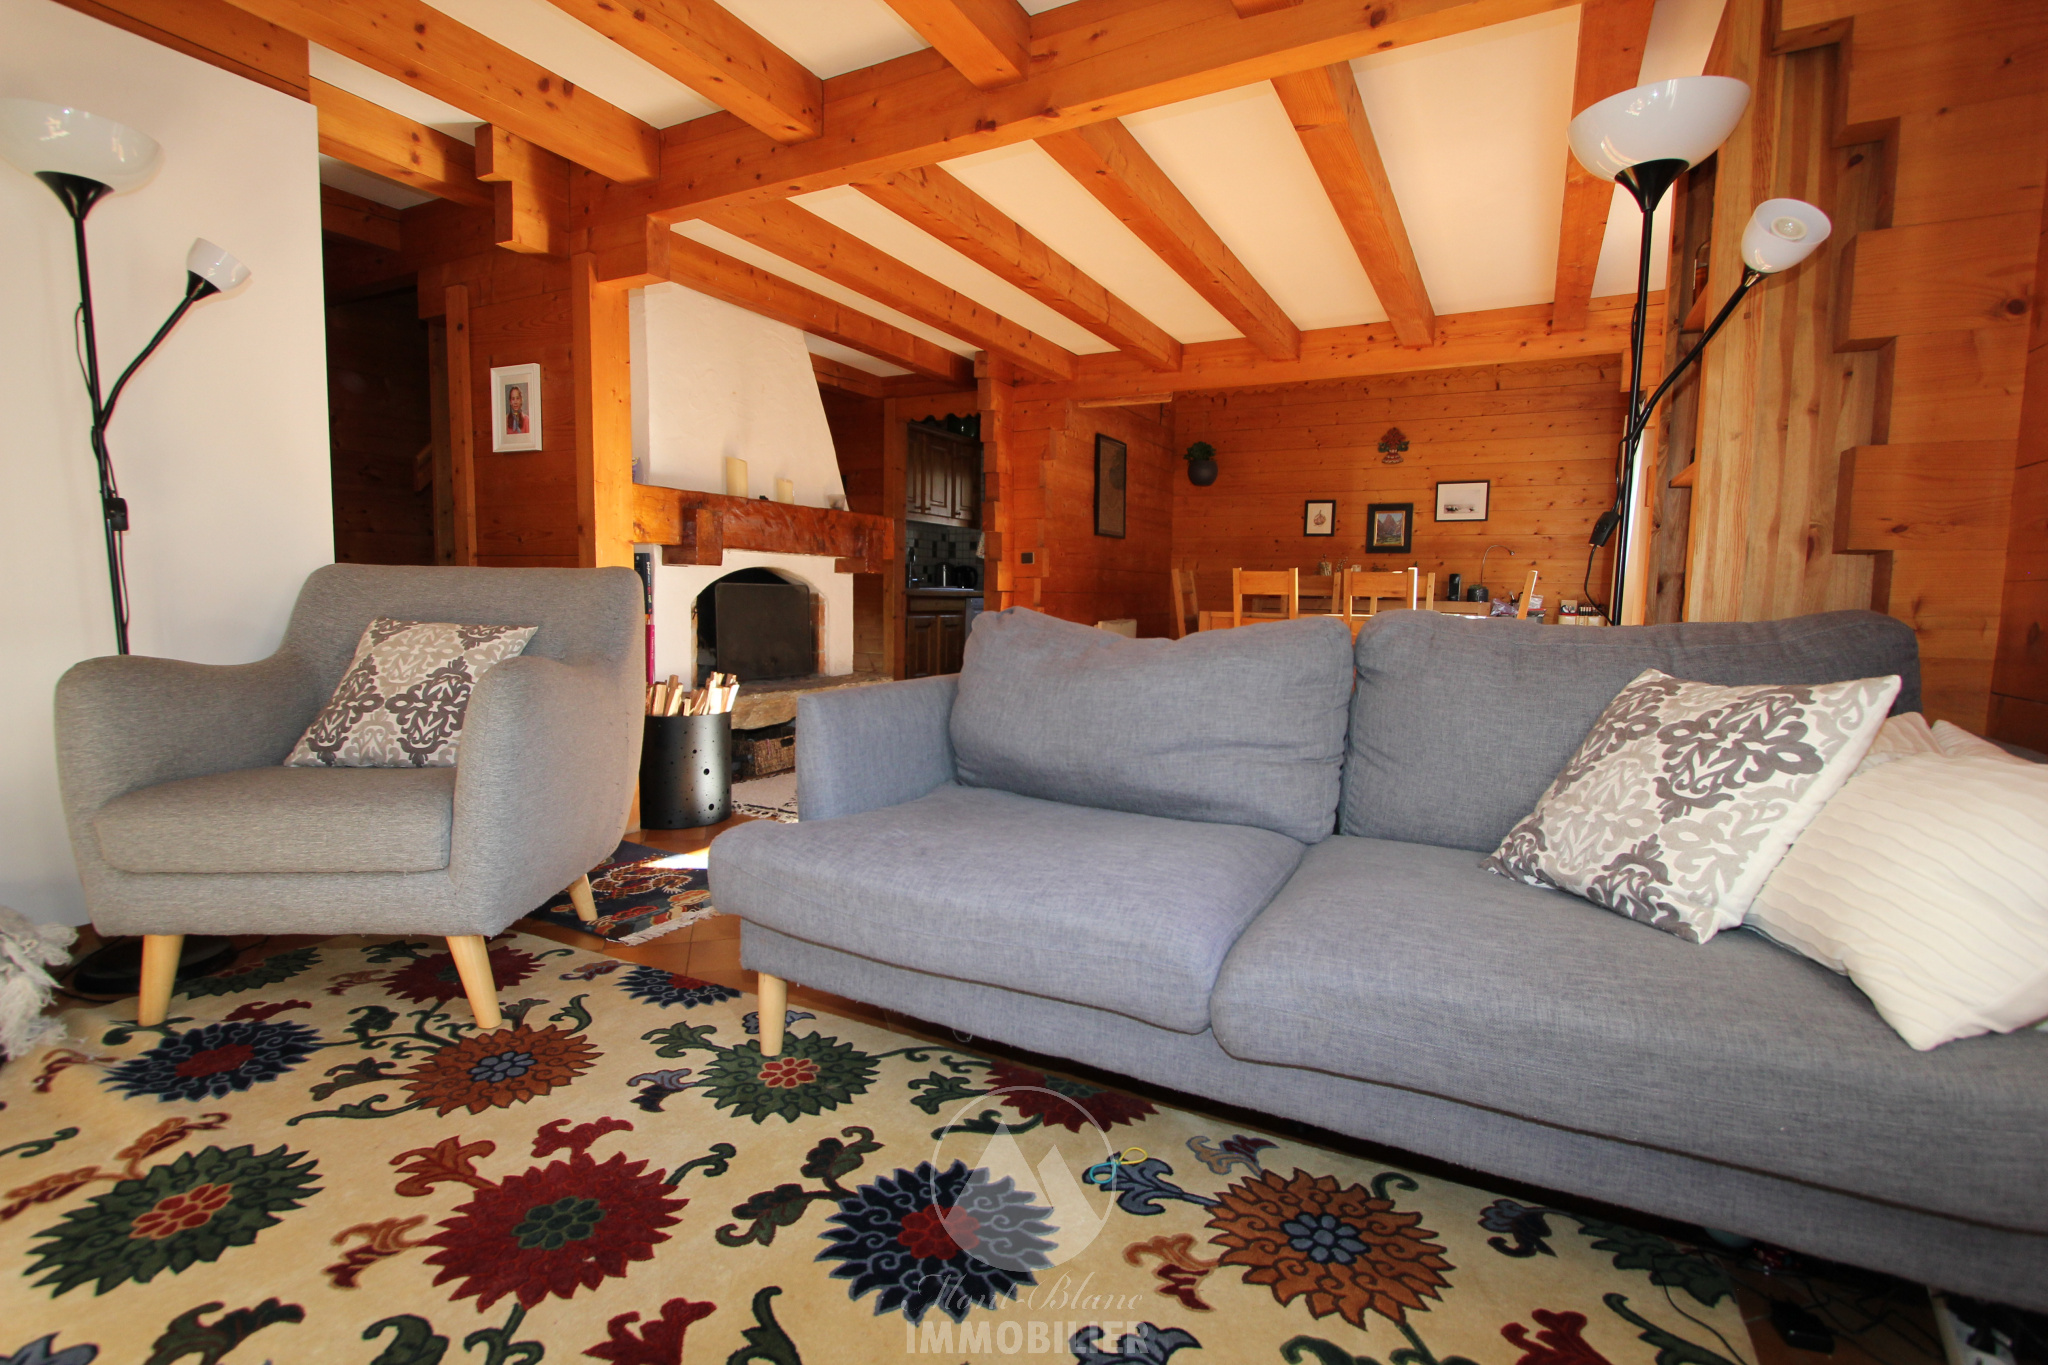 Chalet Le Gouter Accommodation in Les Houches